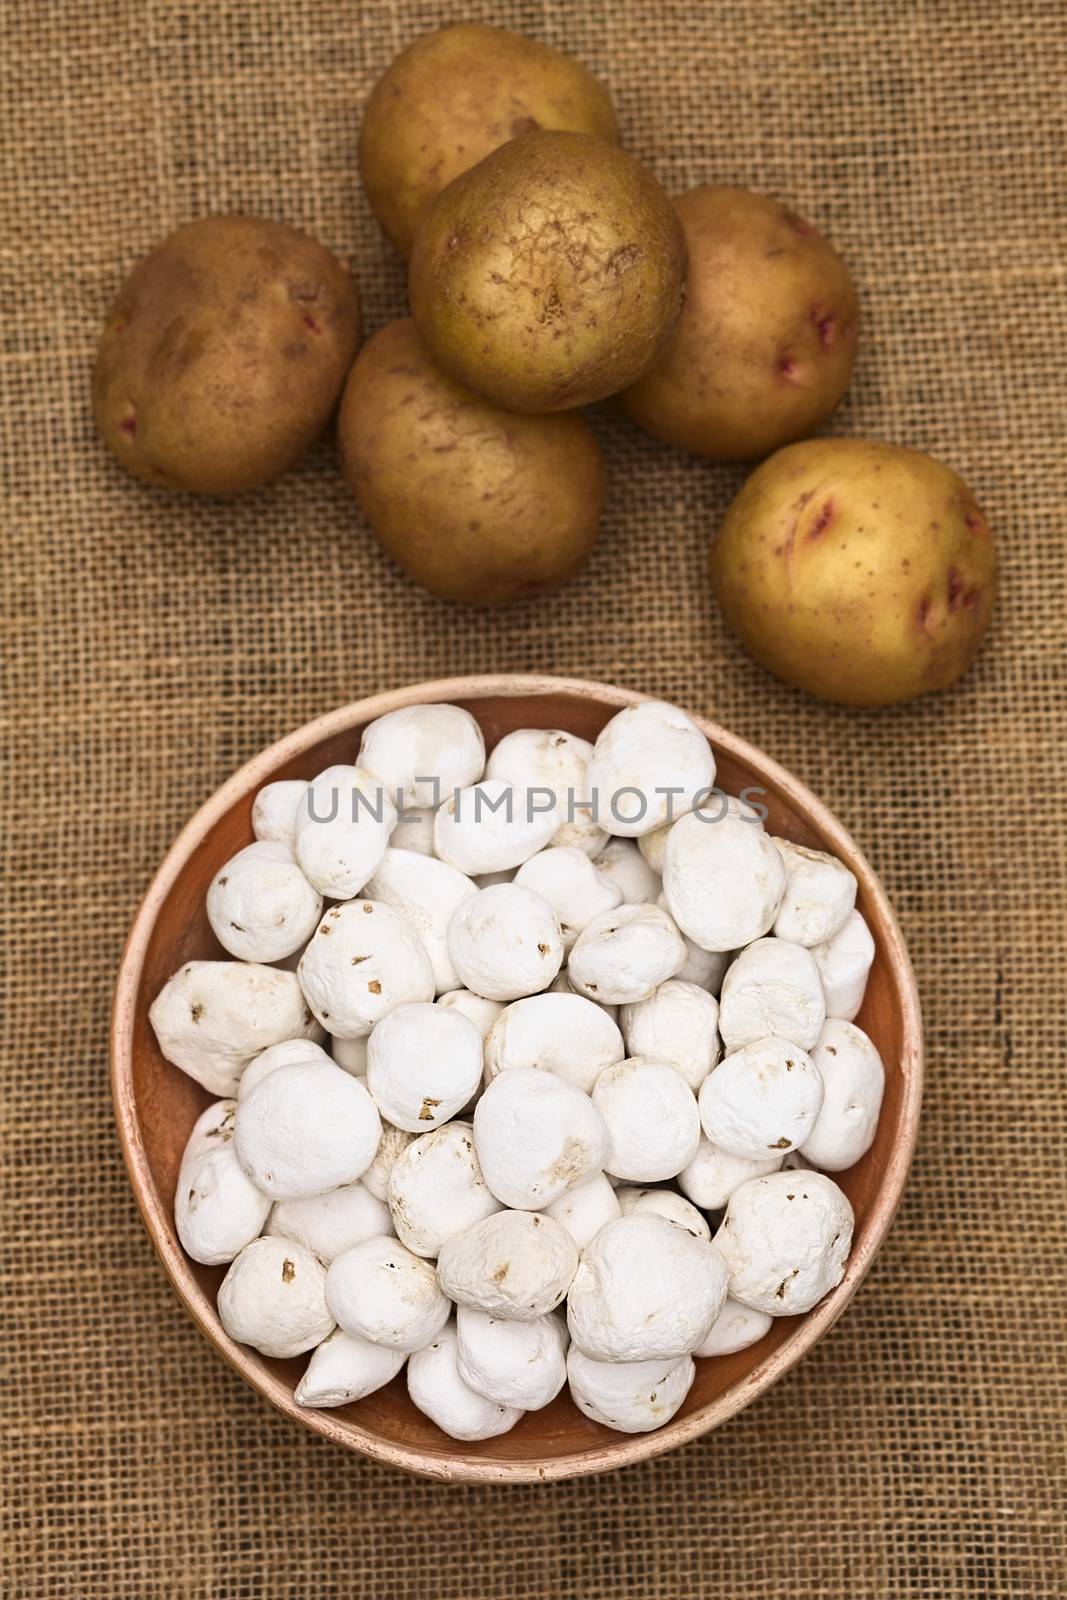 Tunta, also called white chuno or moraya, is a freeze-dried (dehydrated) potato made in the Andes region, mainly Bolivia and Peru. The potato is durable for a long time this way. Tunta and chuno are used in many traditional dishes in Bolivia (Selective Focus, Focus on the upper potatoes in the middle and the front of the bowl) (Photographed with natural light)